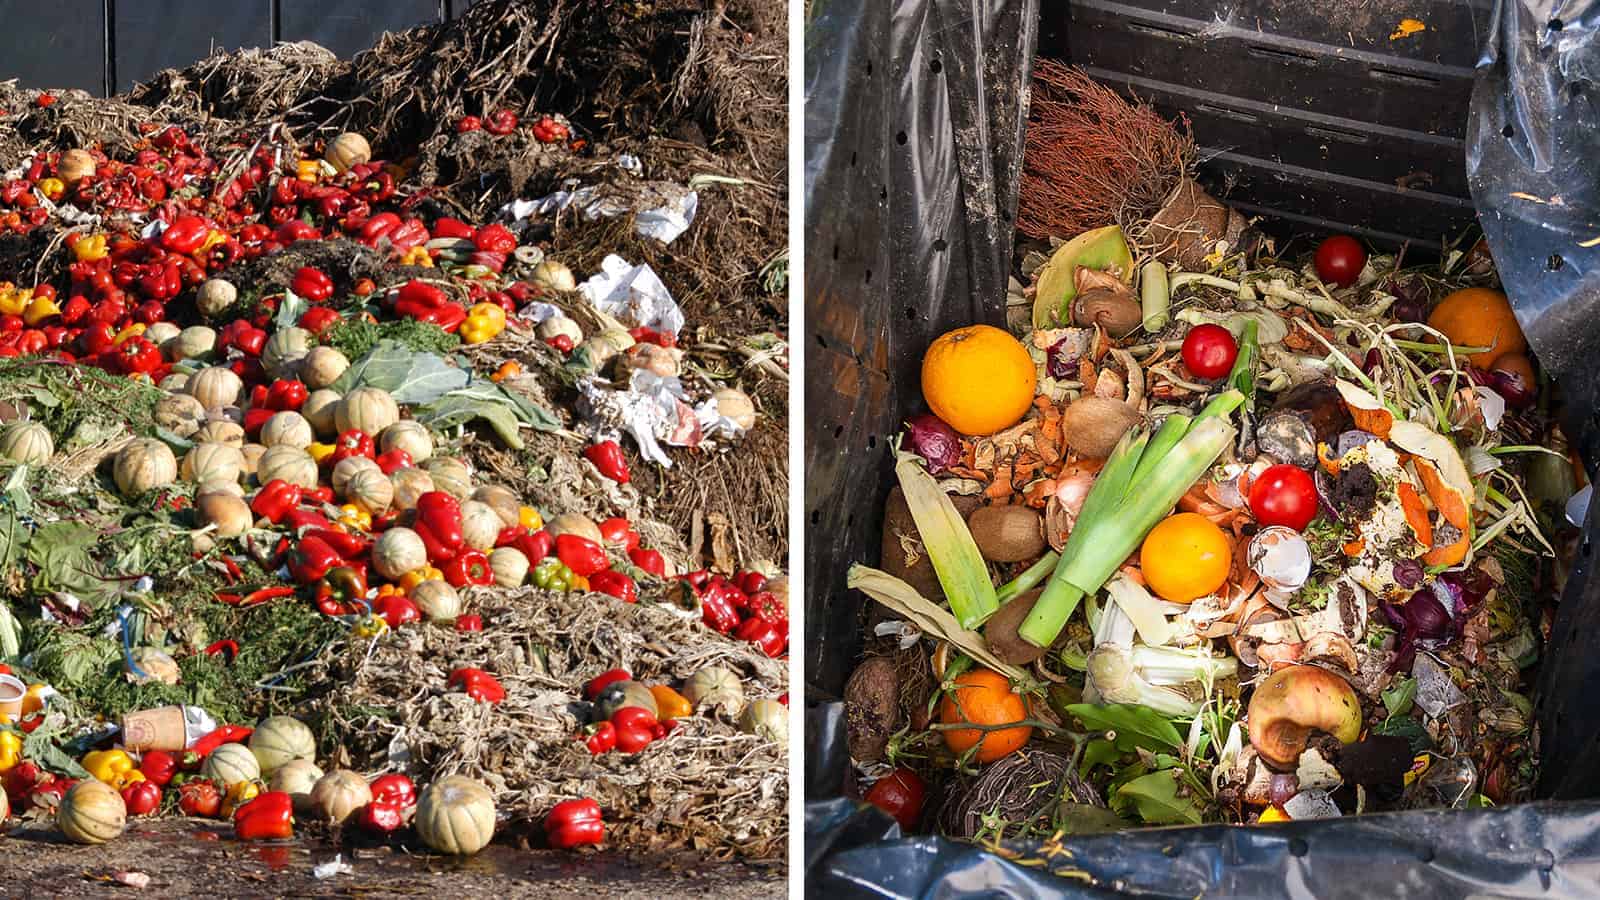 Google Develops AI to Help End Food Waste and Feed the Hungry